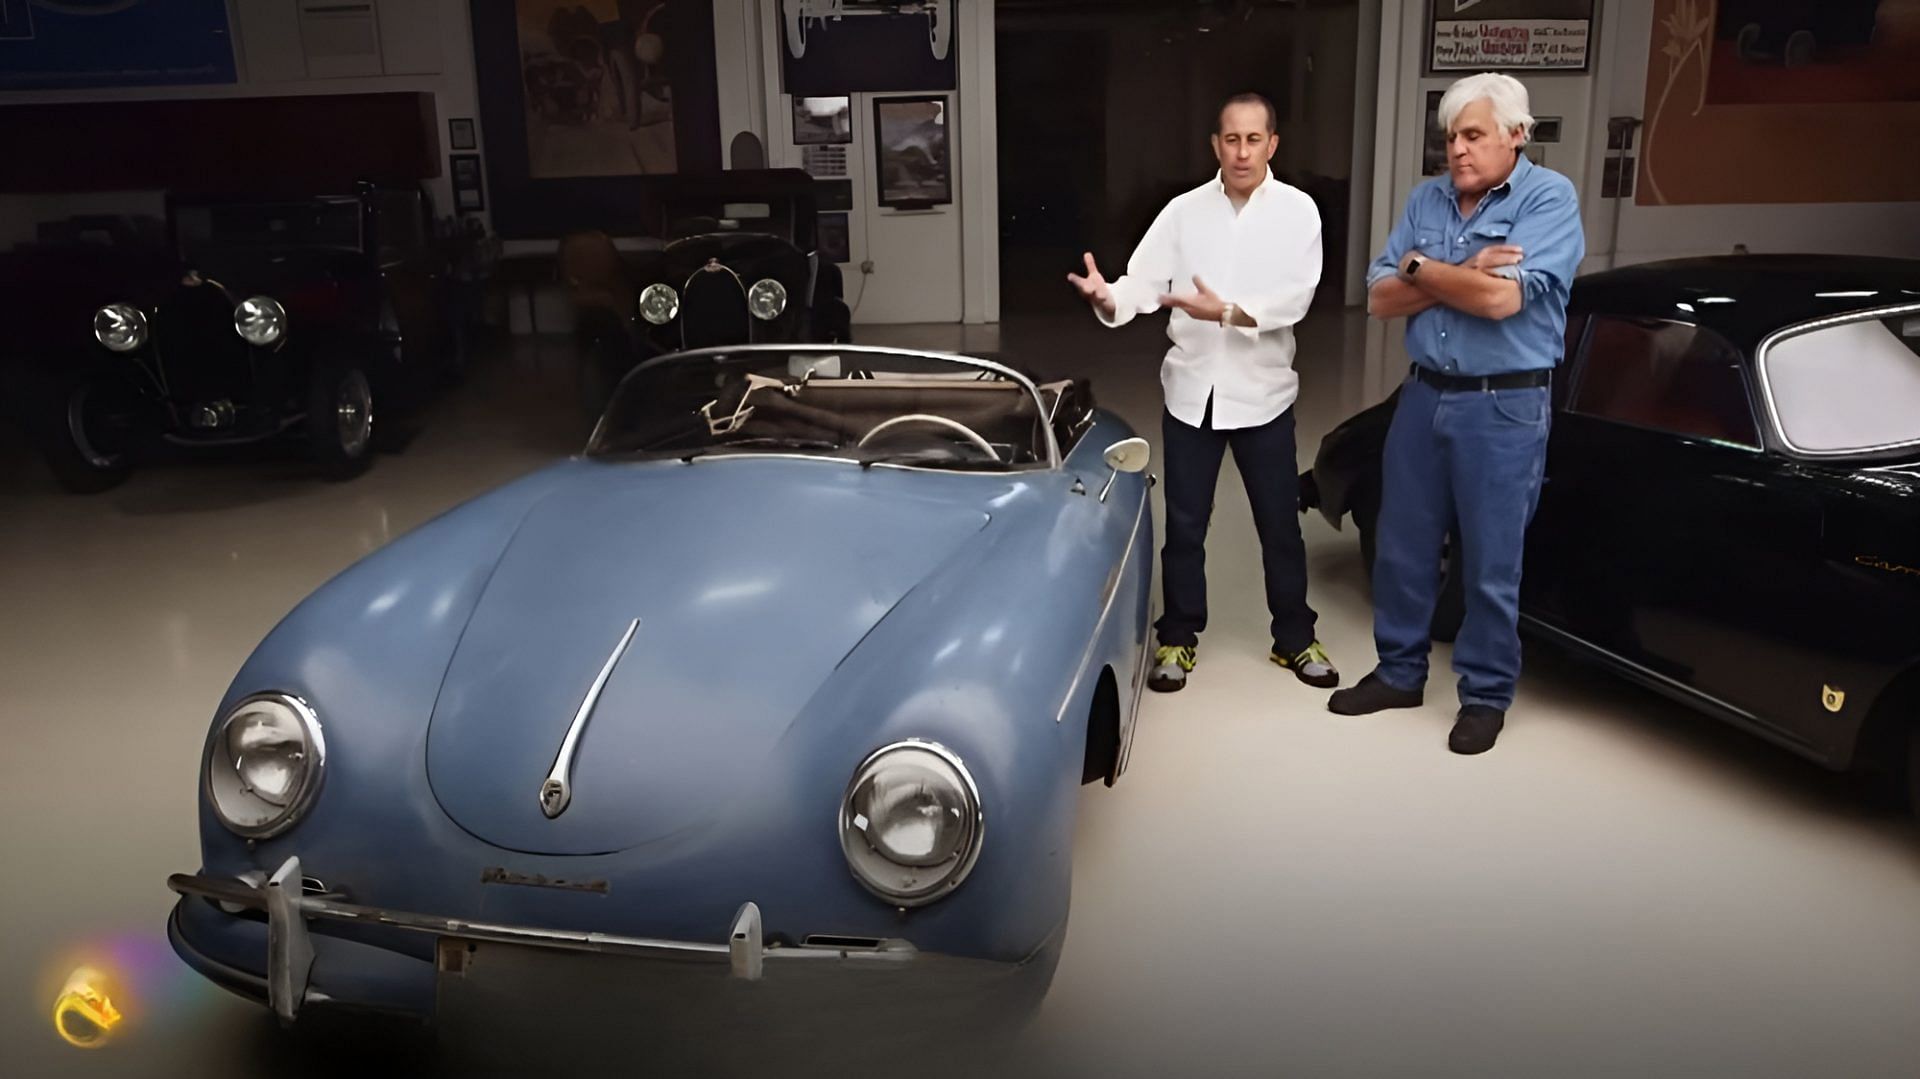 Jerry Seinfeld and jay Leno talking about his 1957 Porsche 356 A Speedster on Jay Leno's Garage